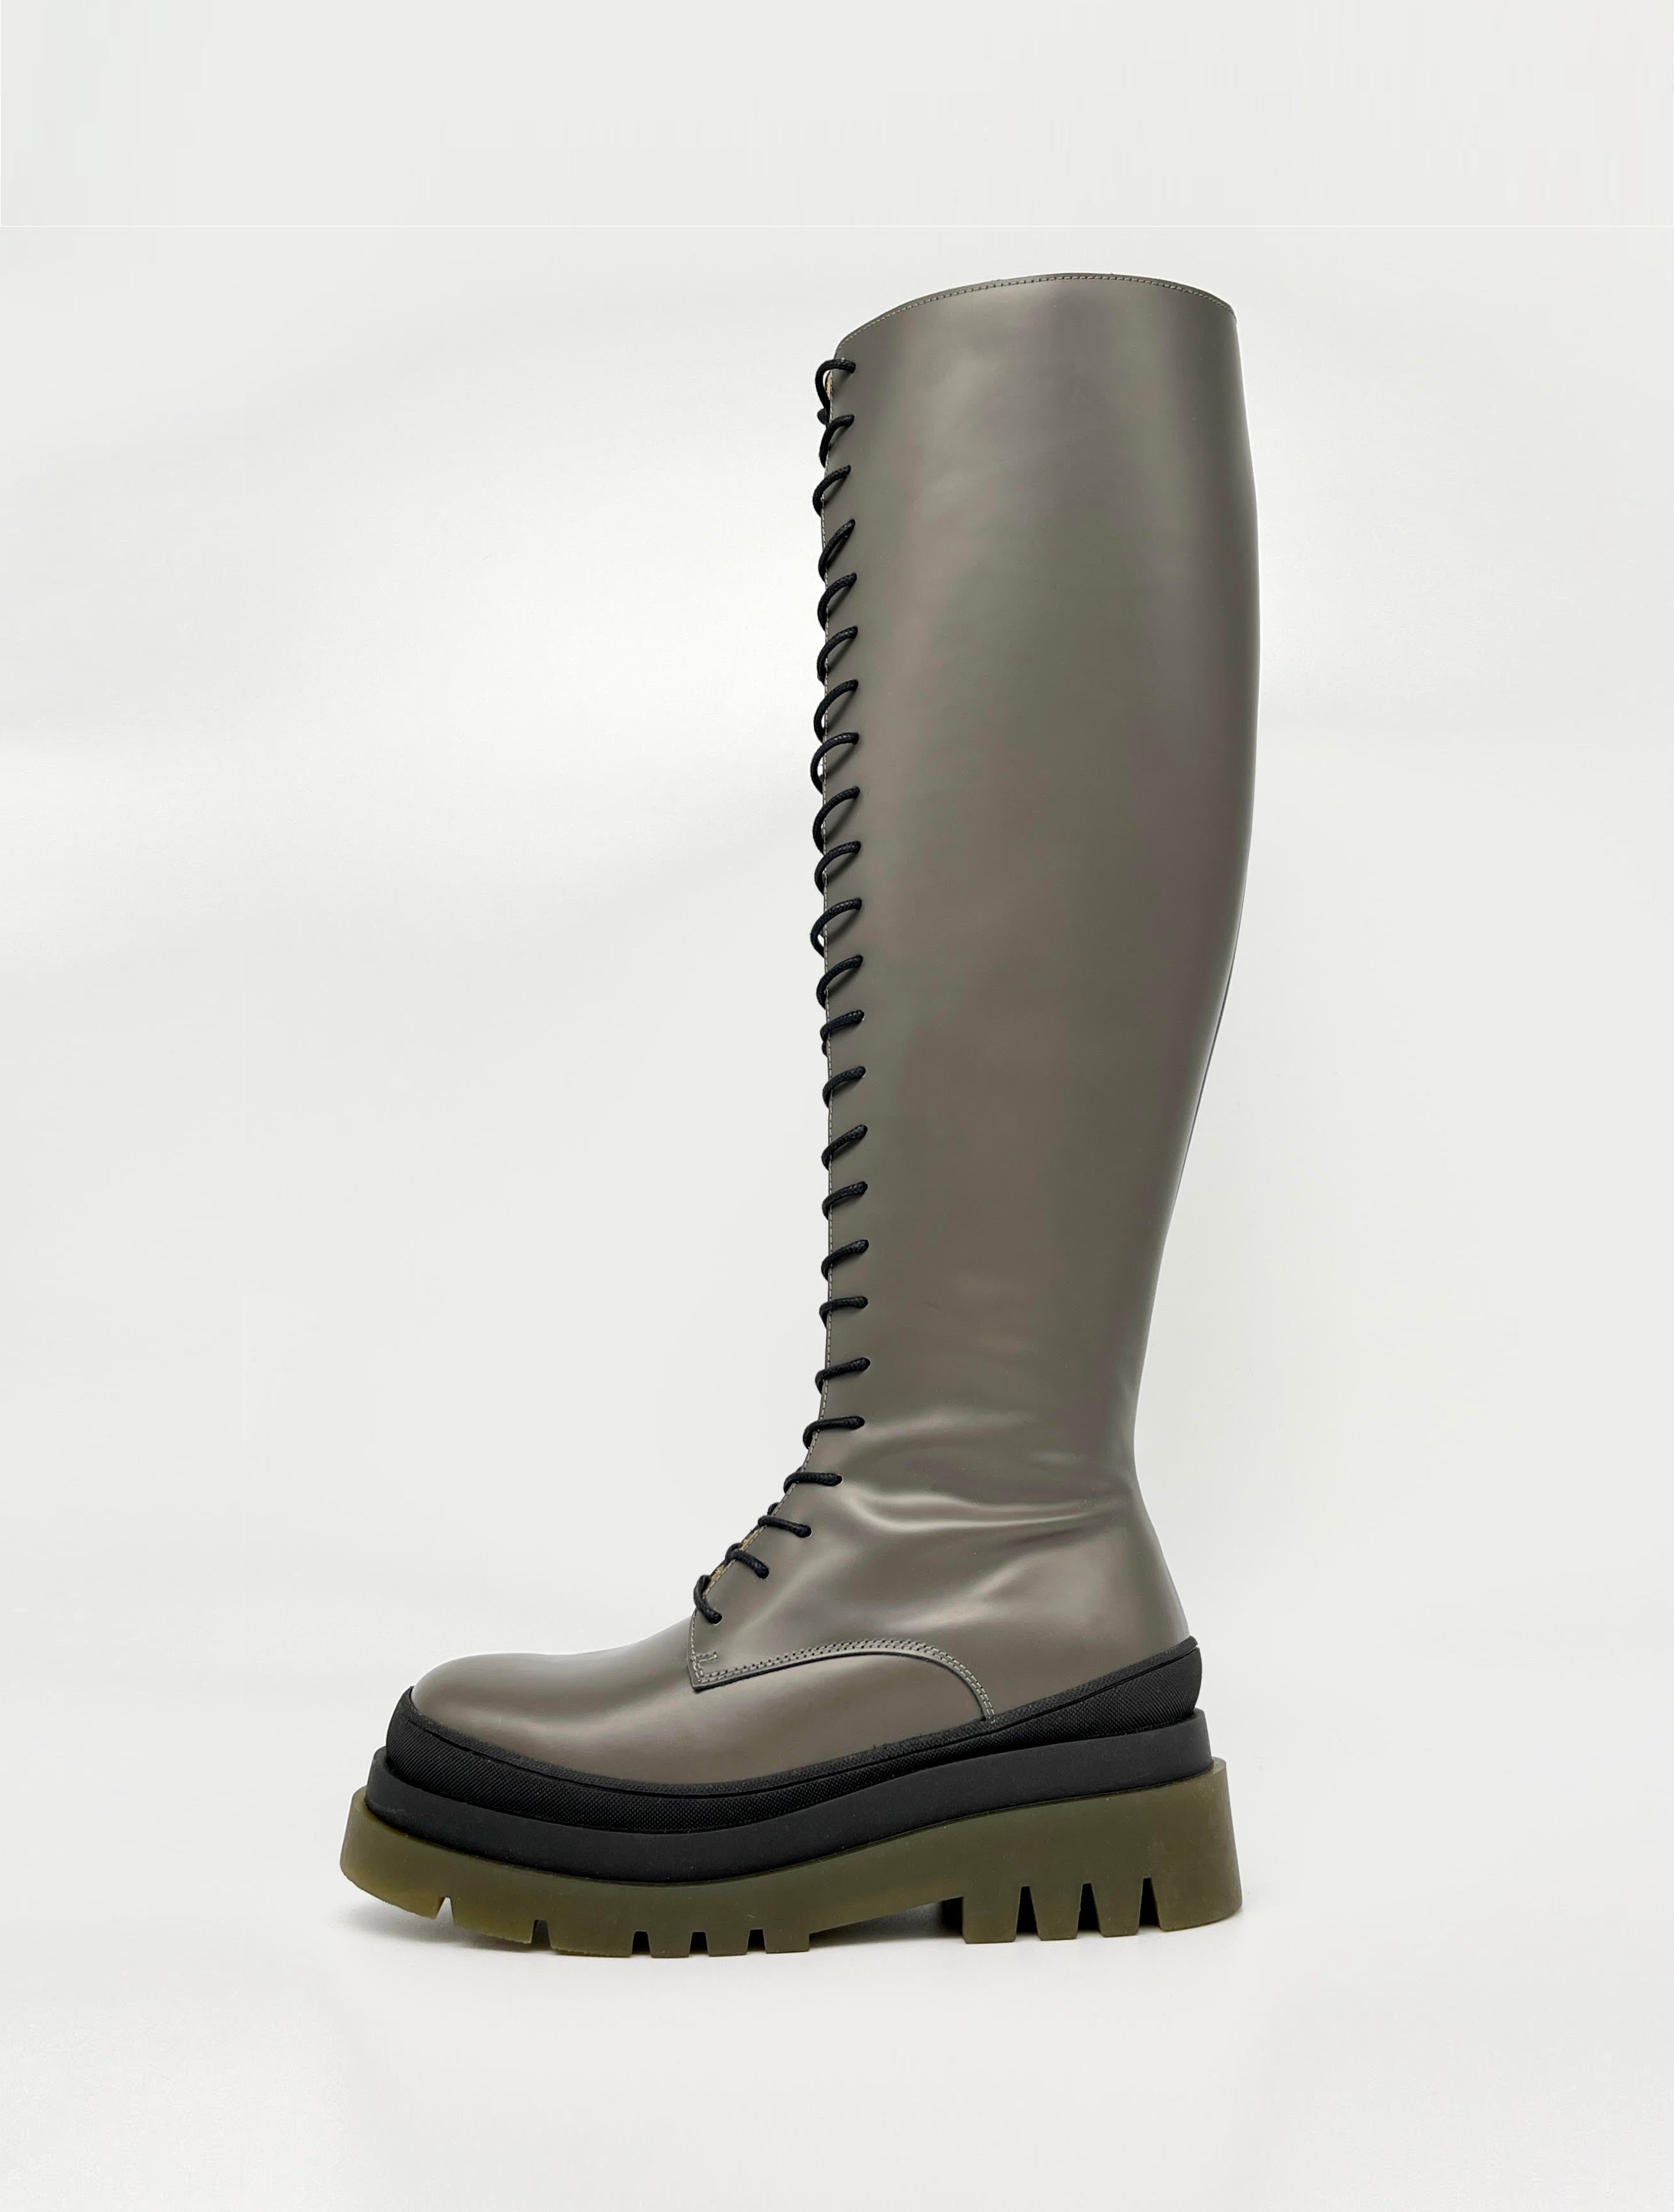 Cagney and Lacey Tall Boot in Color Mud grey